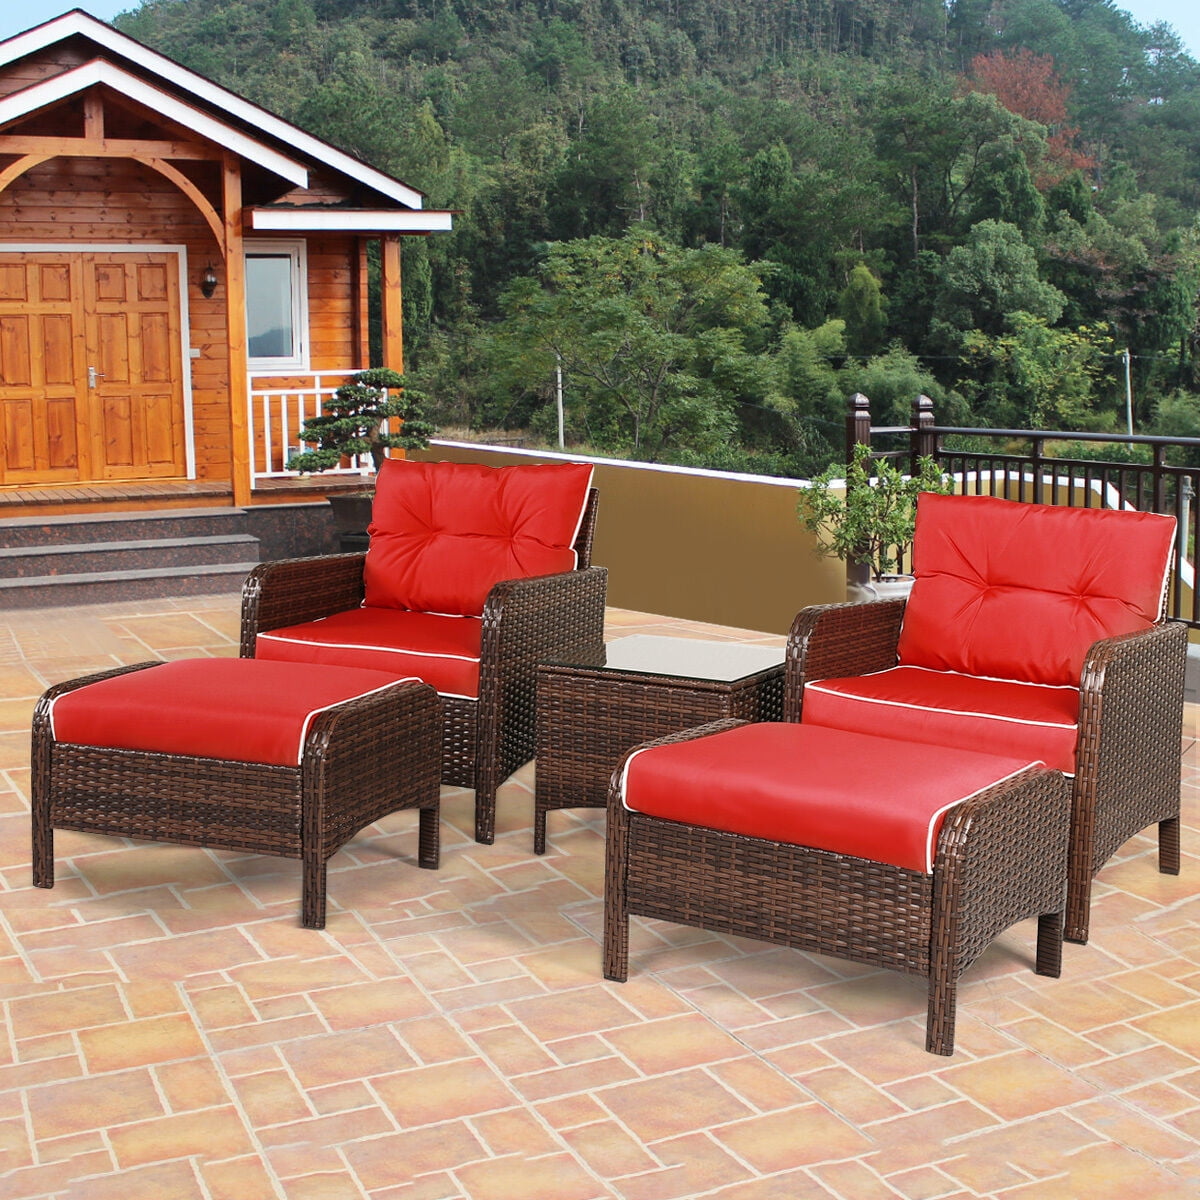 Costway 5 PCS Patio Rattan Wicker Furniture Set Sofa Ottoman with Red